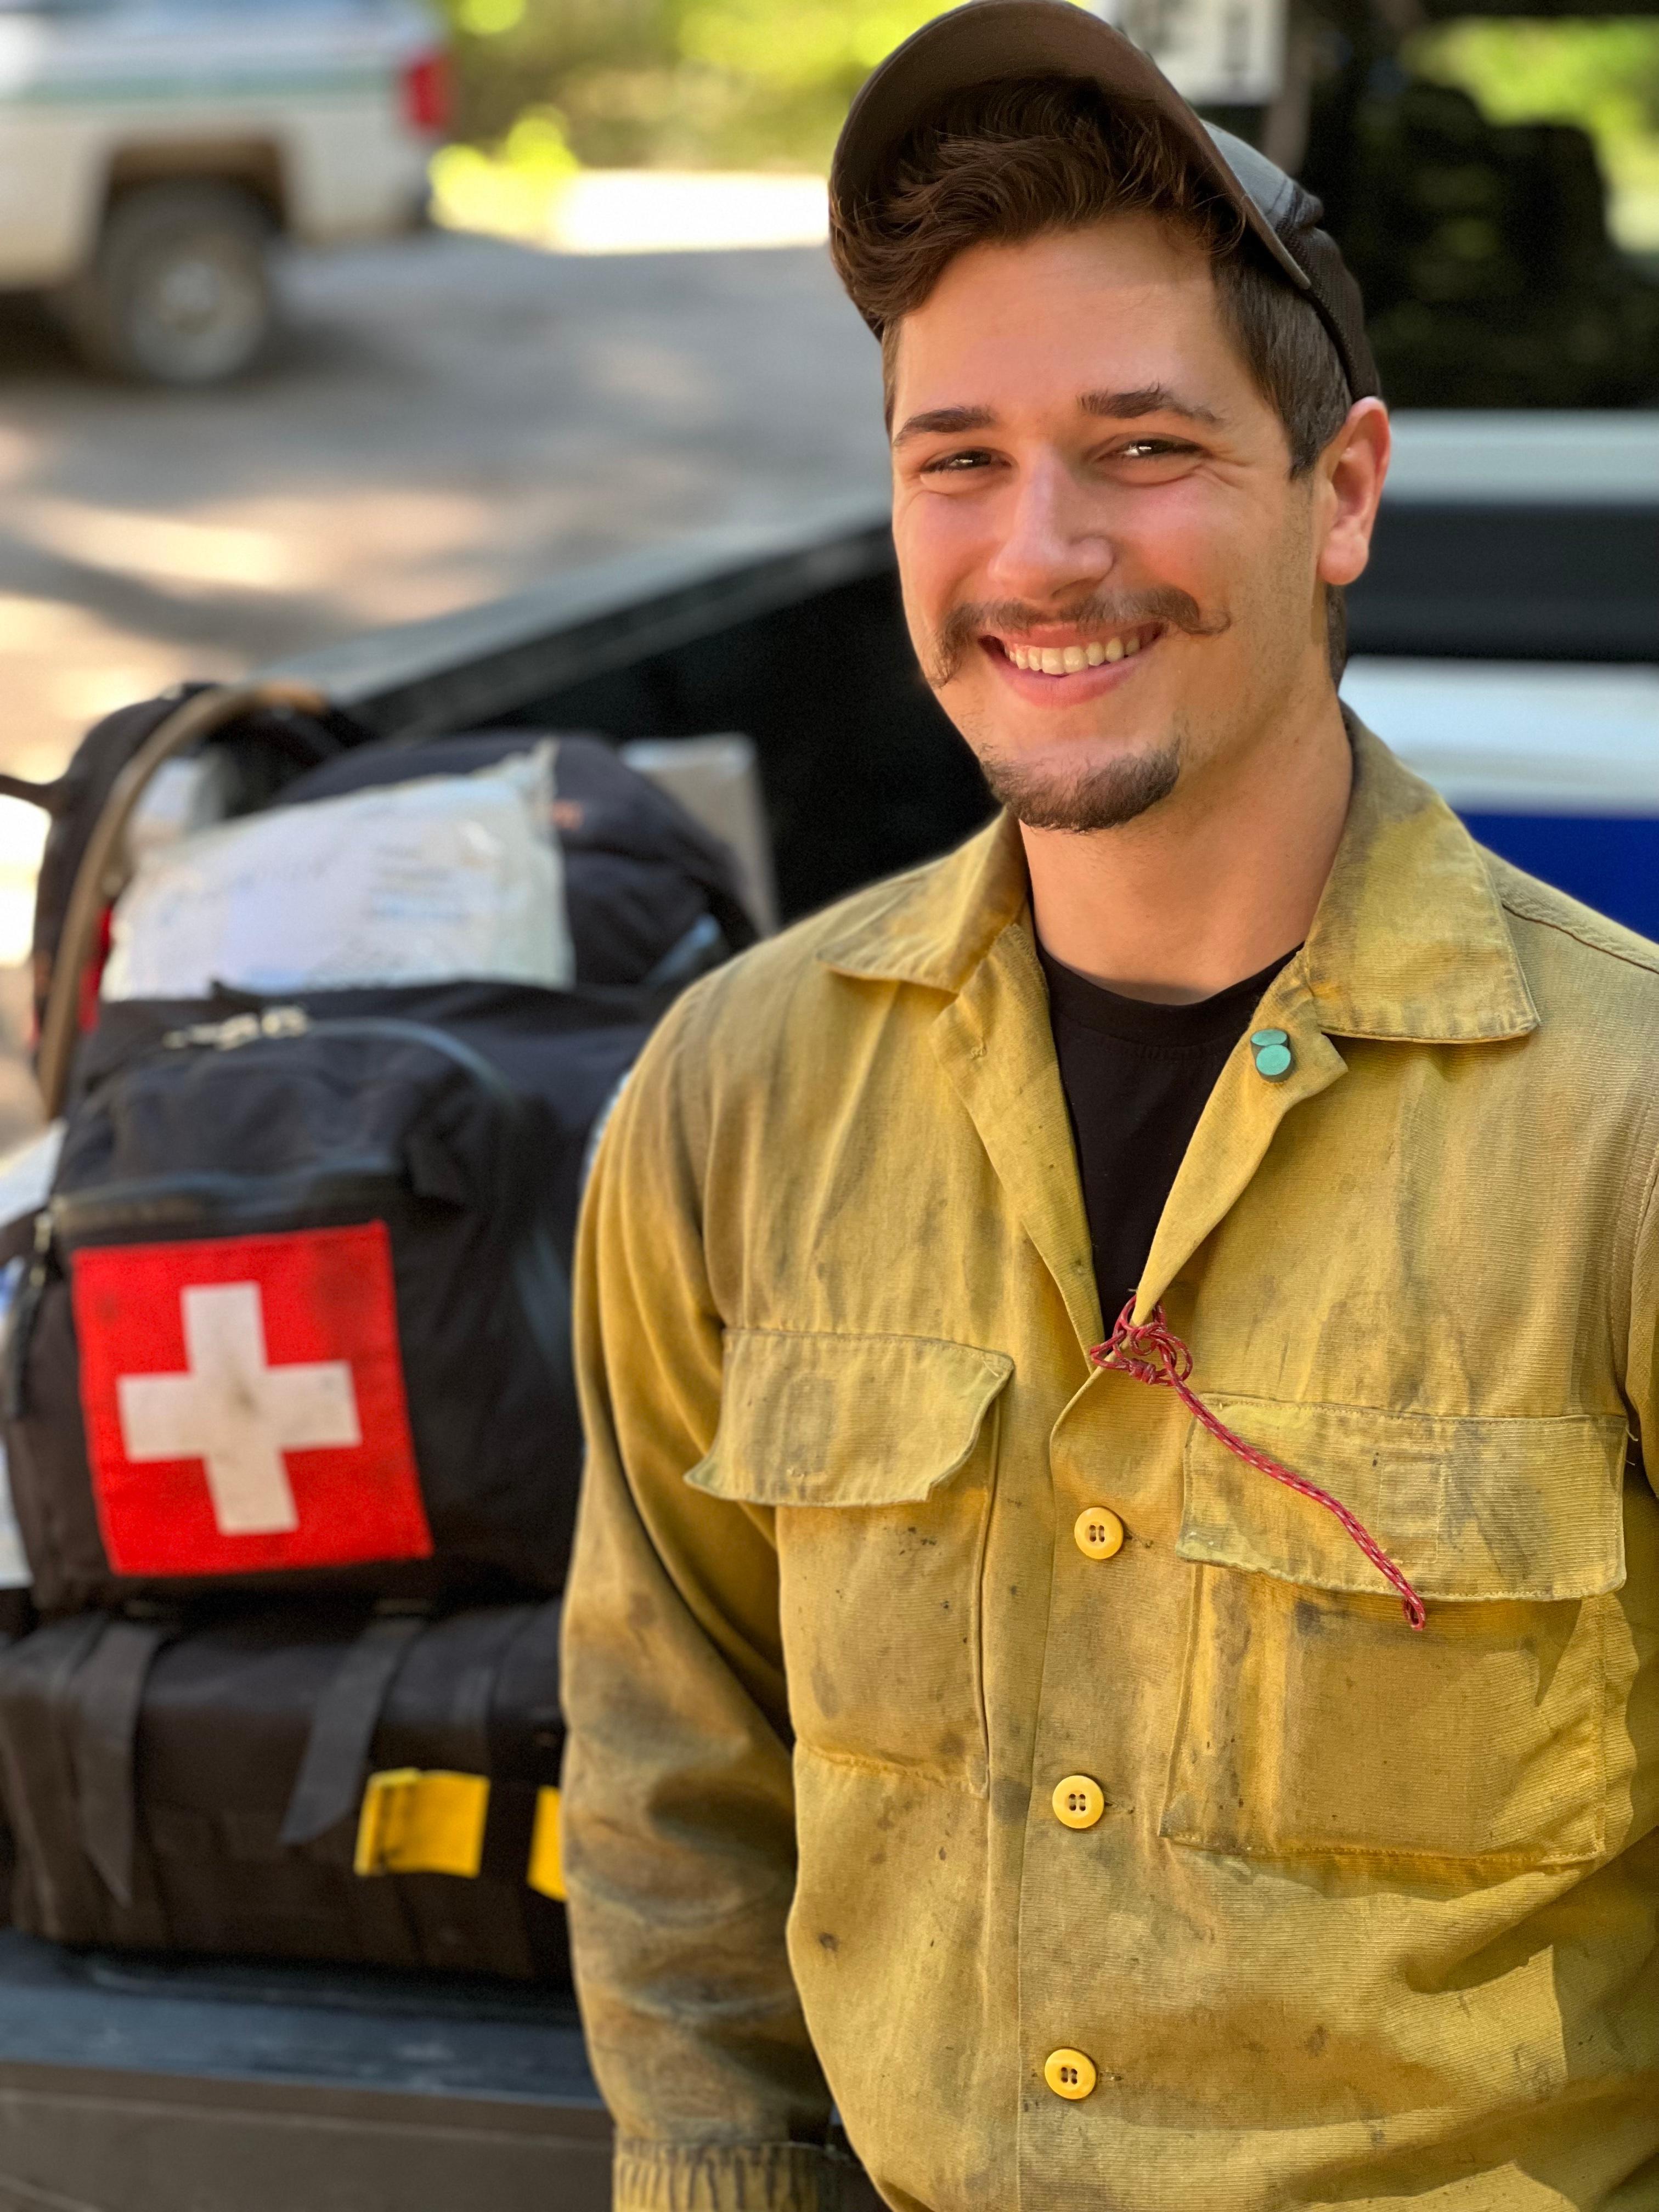 A smiling firefighter in a yellow protective shirt is seen, standing next to a pack marked with a medical symbol. His job is fireline emergency medical technician.